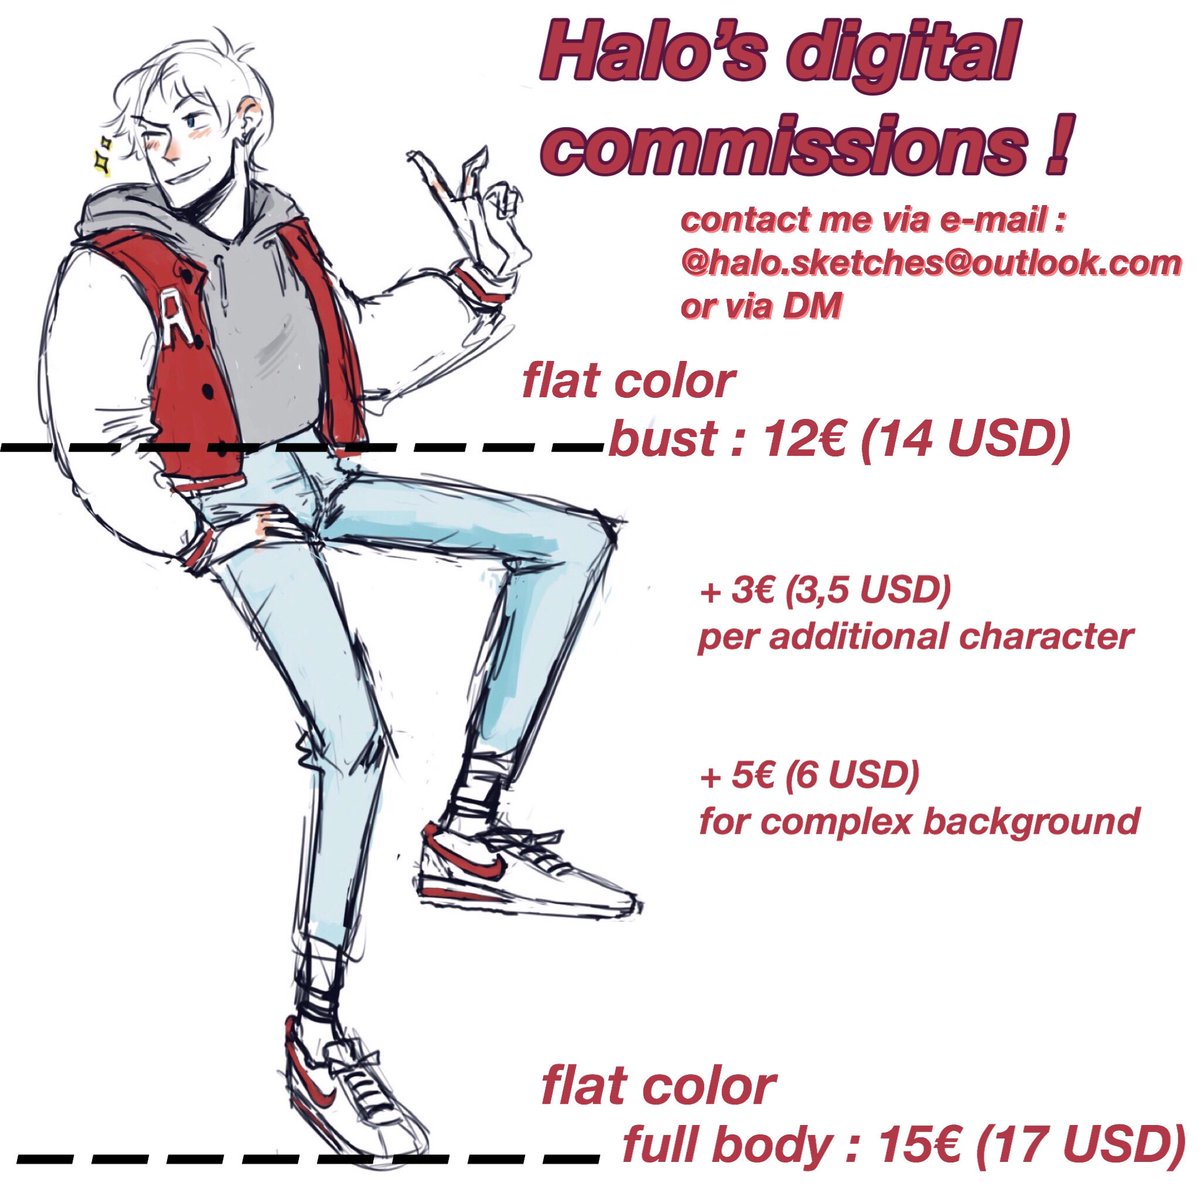 hi ! im opening my commissions for the summer! 
contact me via DM or e-mail (halo.sketches@outlook.com) for more questions ! 

(ko-fi link is in bio)

❤️thanks for the support ❤️ 